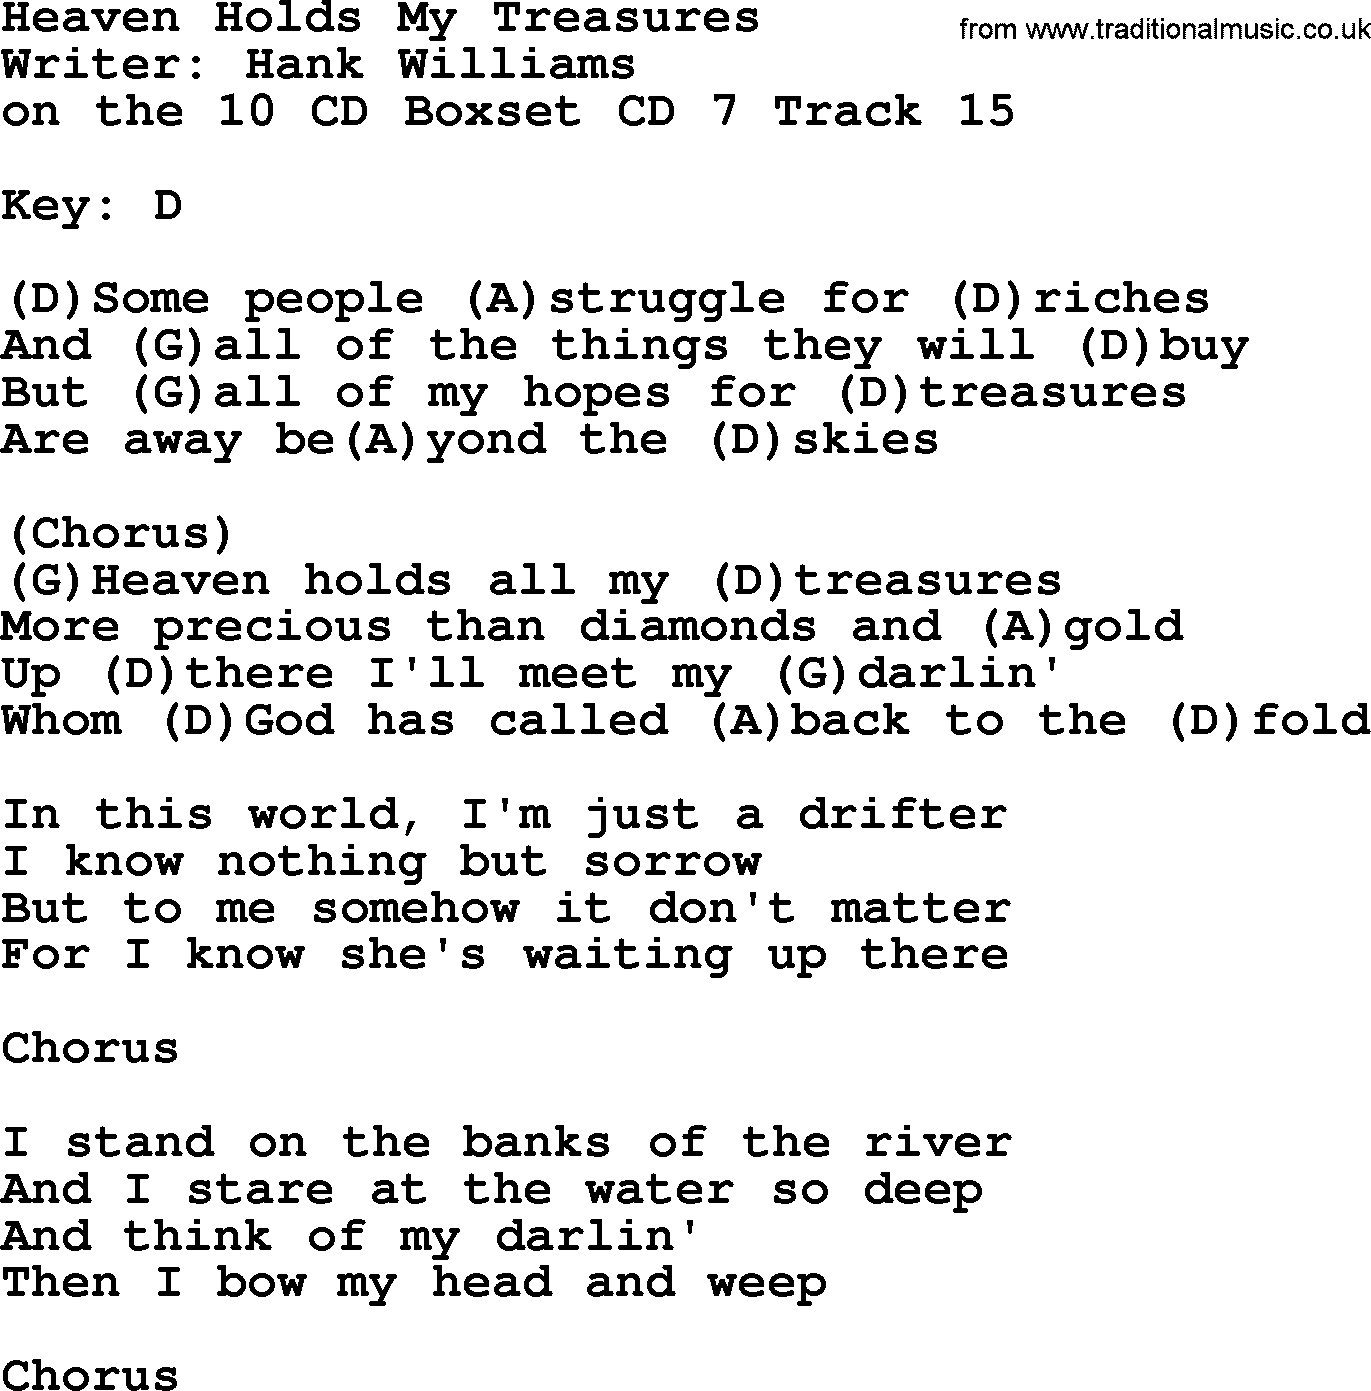 Hank Williams song Heaven Holds My Treasures, lyrics and chords